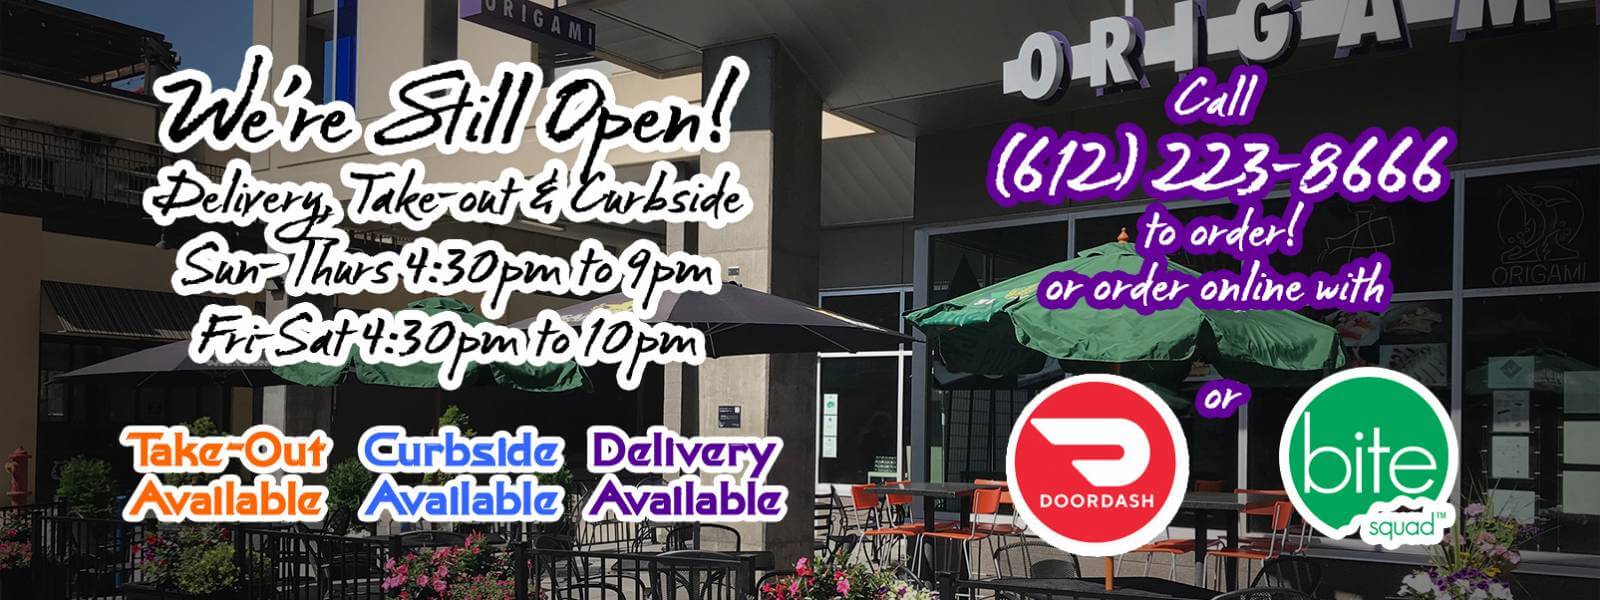 Origami is Open! Delivery, Take-Out & Curbside